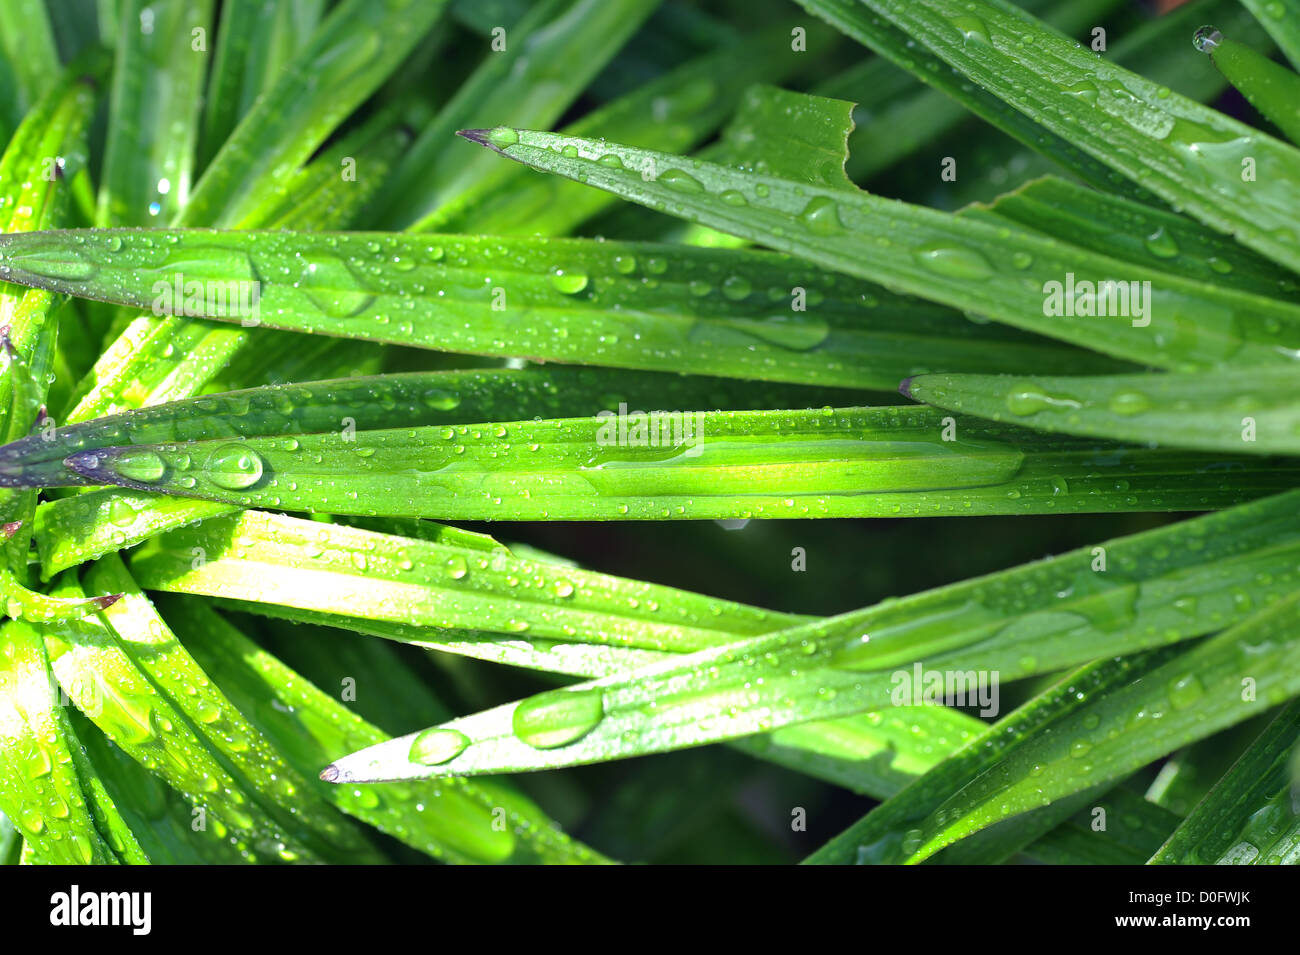 Vibrant green plant with spear shaped leaves speckled in sunlight and water droplets Stock Photo